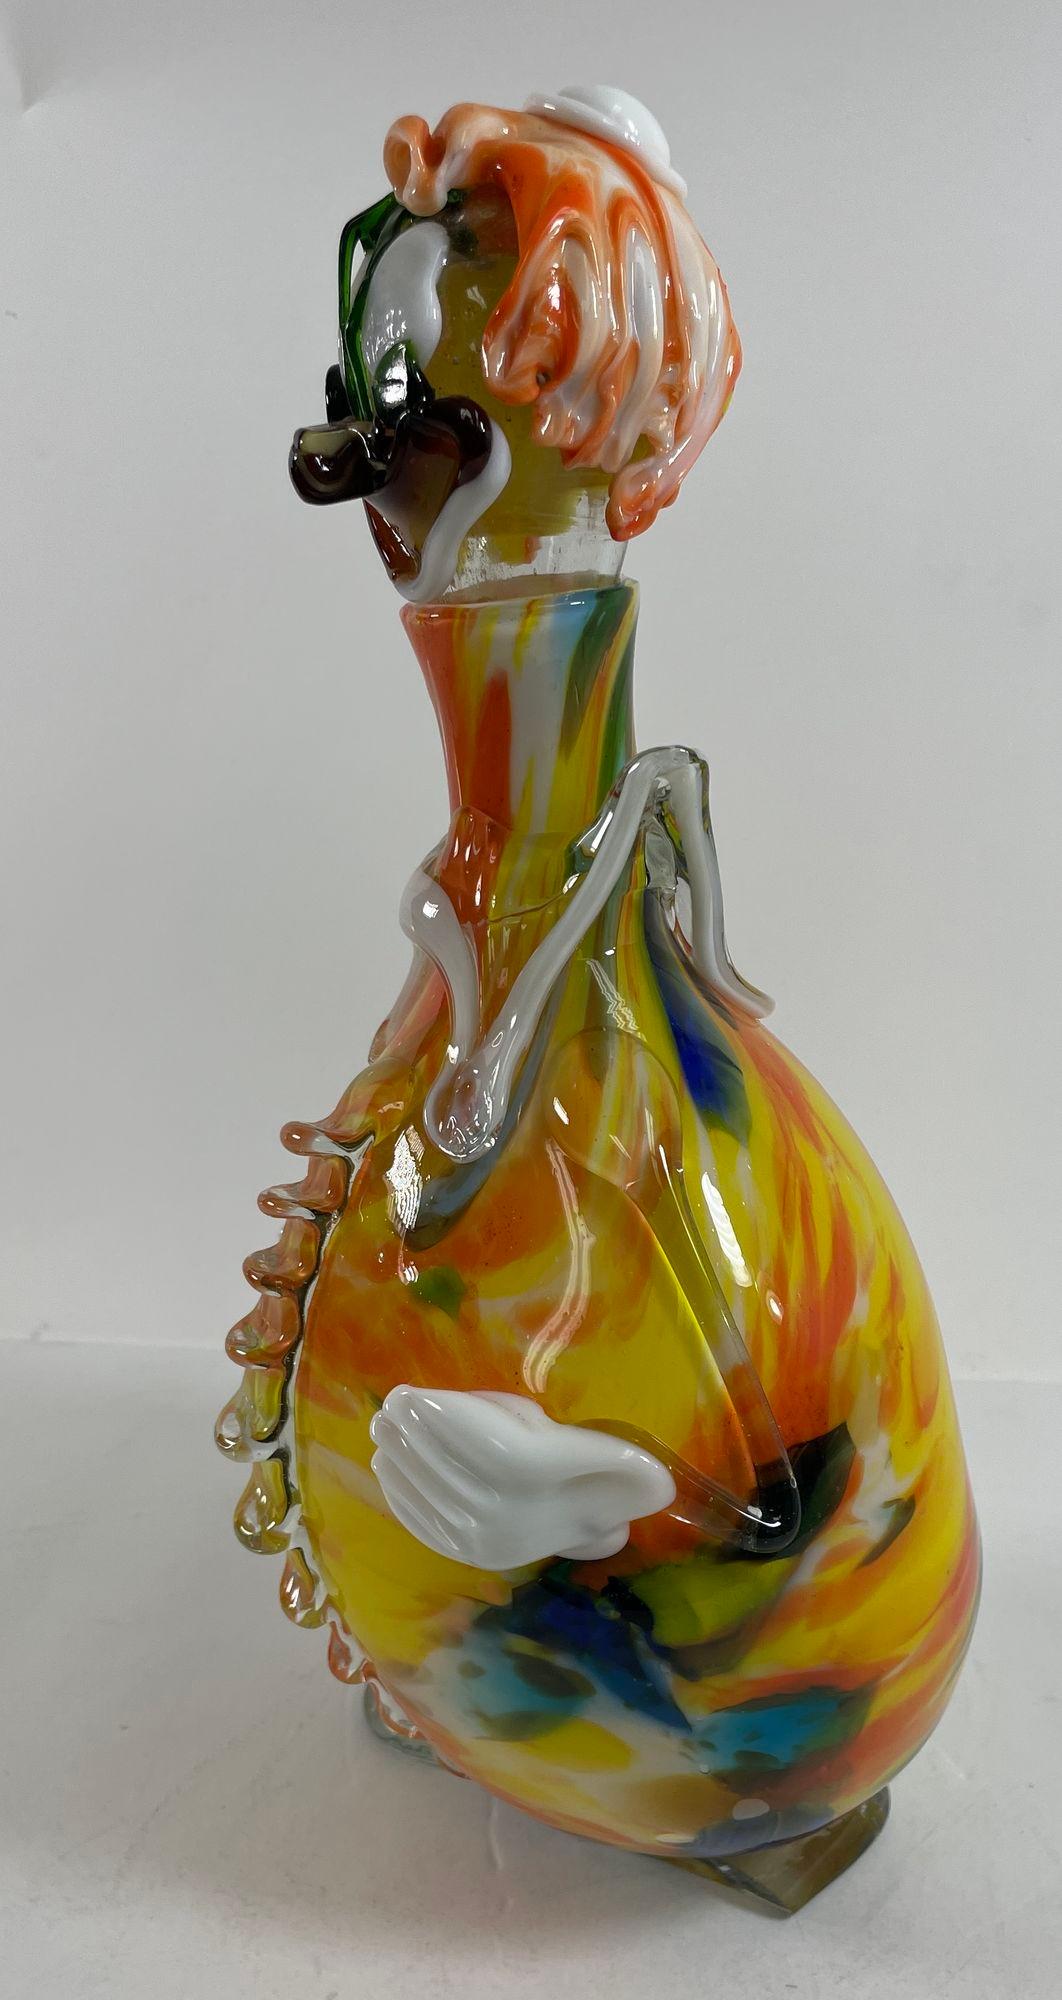 Vintage Large Hand Blown Italian Murano Glass Clown Decanter Bottle 13.5” .
Amazing colorful hand blown Murano glass clown decanter with hat and bow tie.
This Italian hand blown Murano glass clown decanter with stopper.
Great art glass work and very